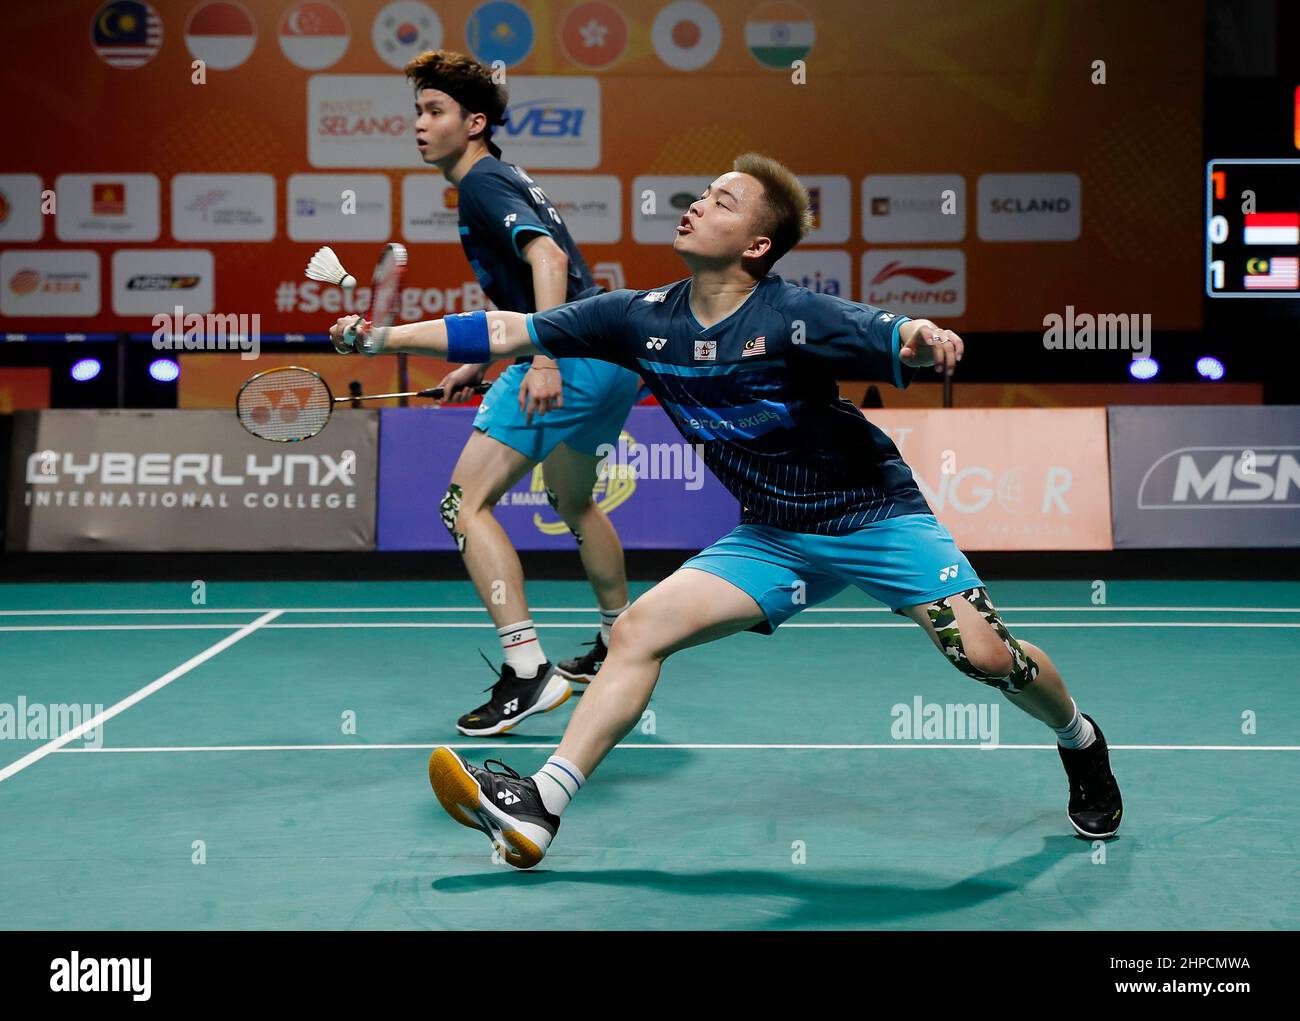 Aaron Chia (R) and Soh Wooi Yik of Malaysia play against Carnando Leo Rolly and Marthin Daniel of Indonesia during the final of the team mens doubles match at the Badminton Asia